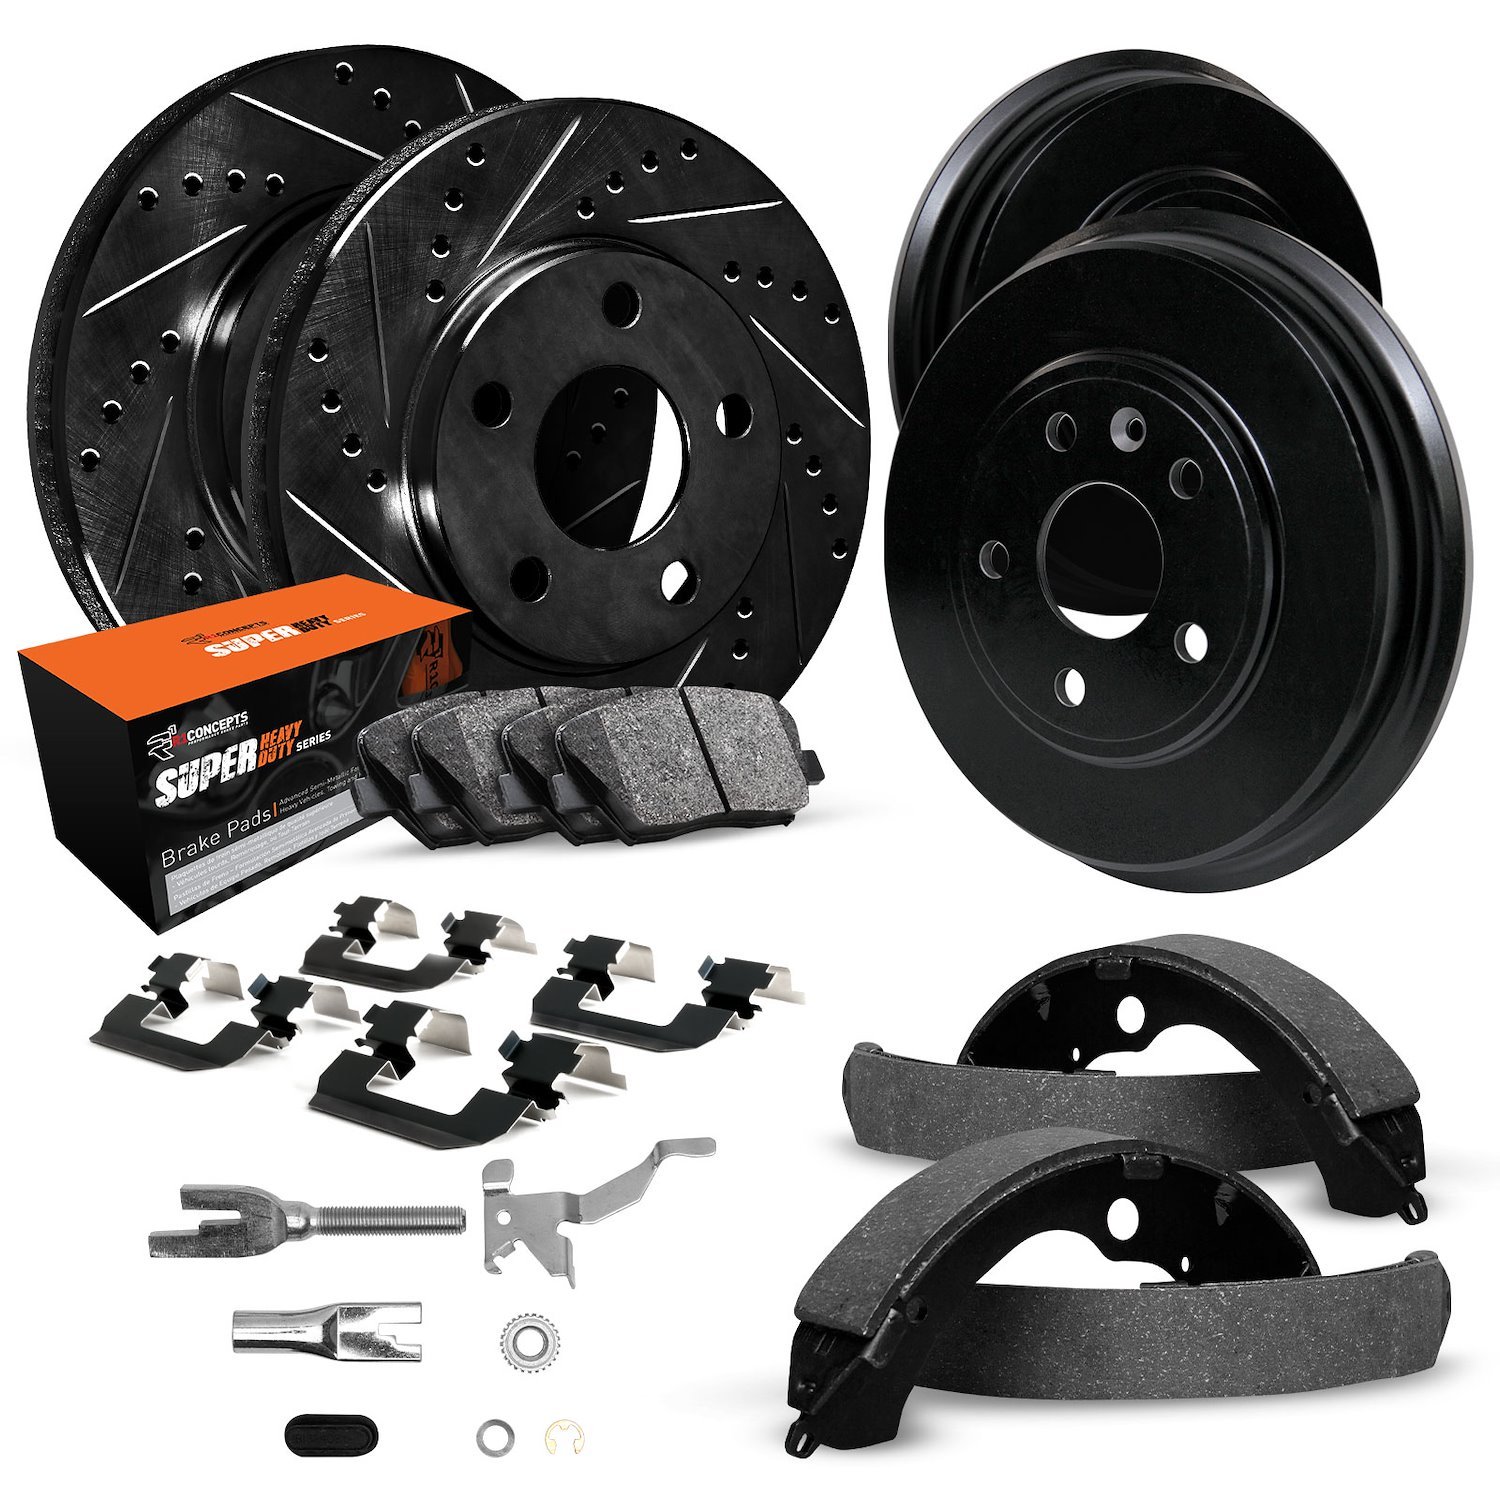 E-Line Drilled/Slotted Black Rotor & Drum Set w/Super-Duty Pads, Shoes, Hardware/Adjusters, 1973-1973 Ford/Lincoln/Mercury/Mazda